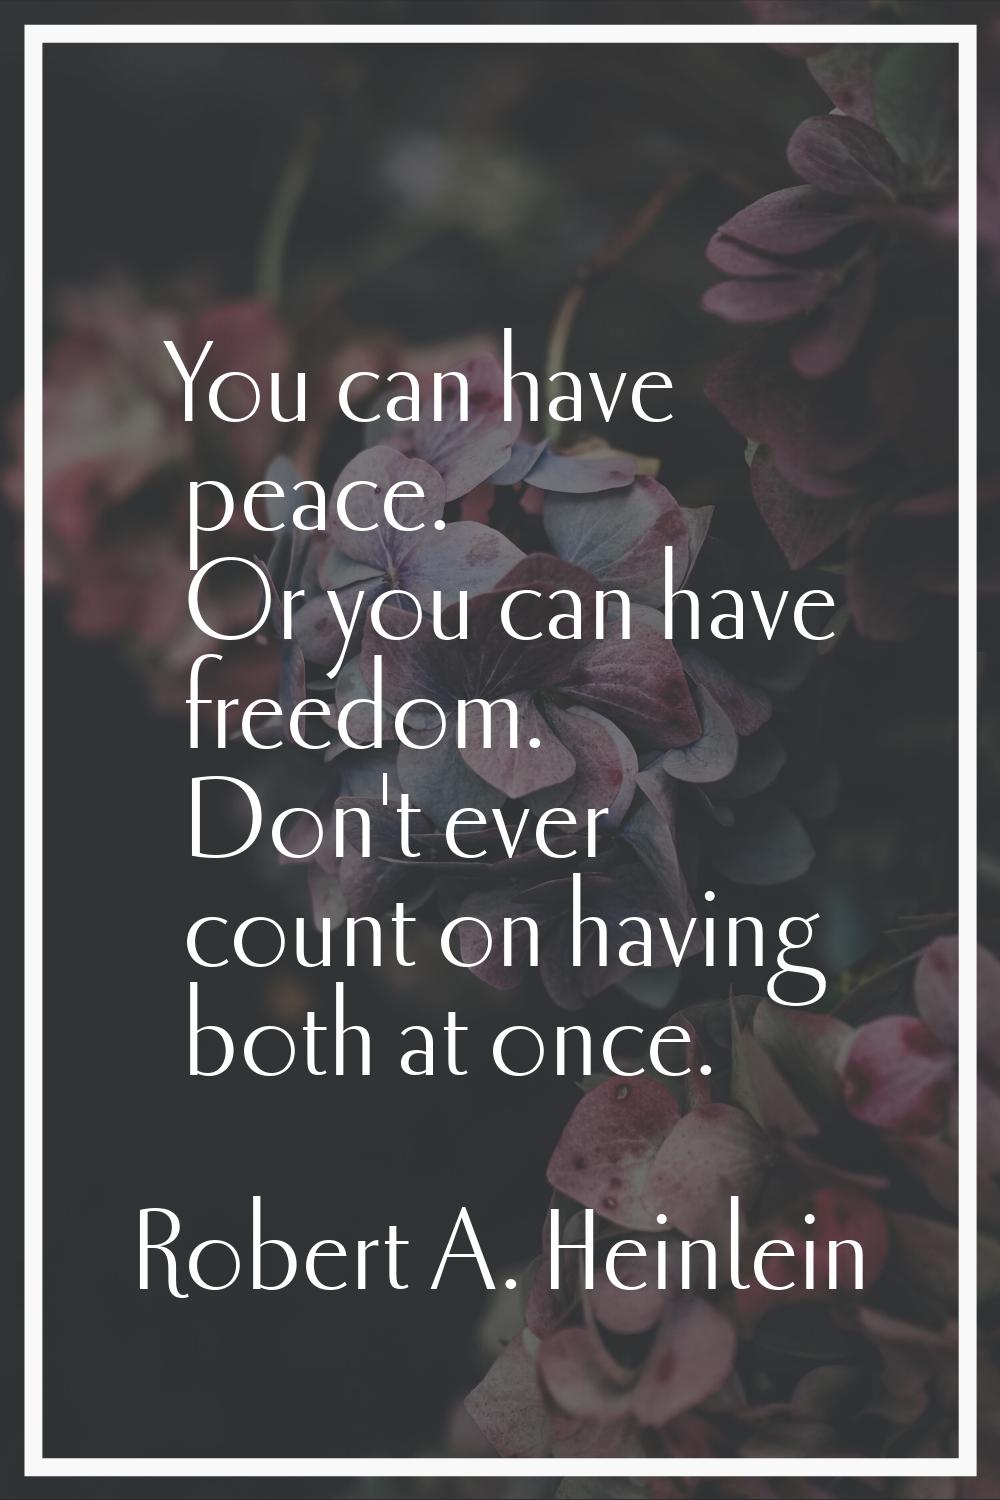 You can have peace. Or you can have freedom. Don't ever count on having both at once.